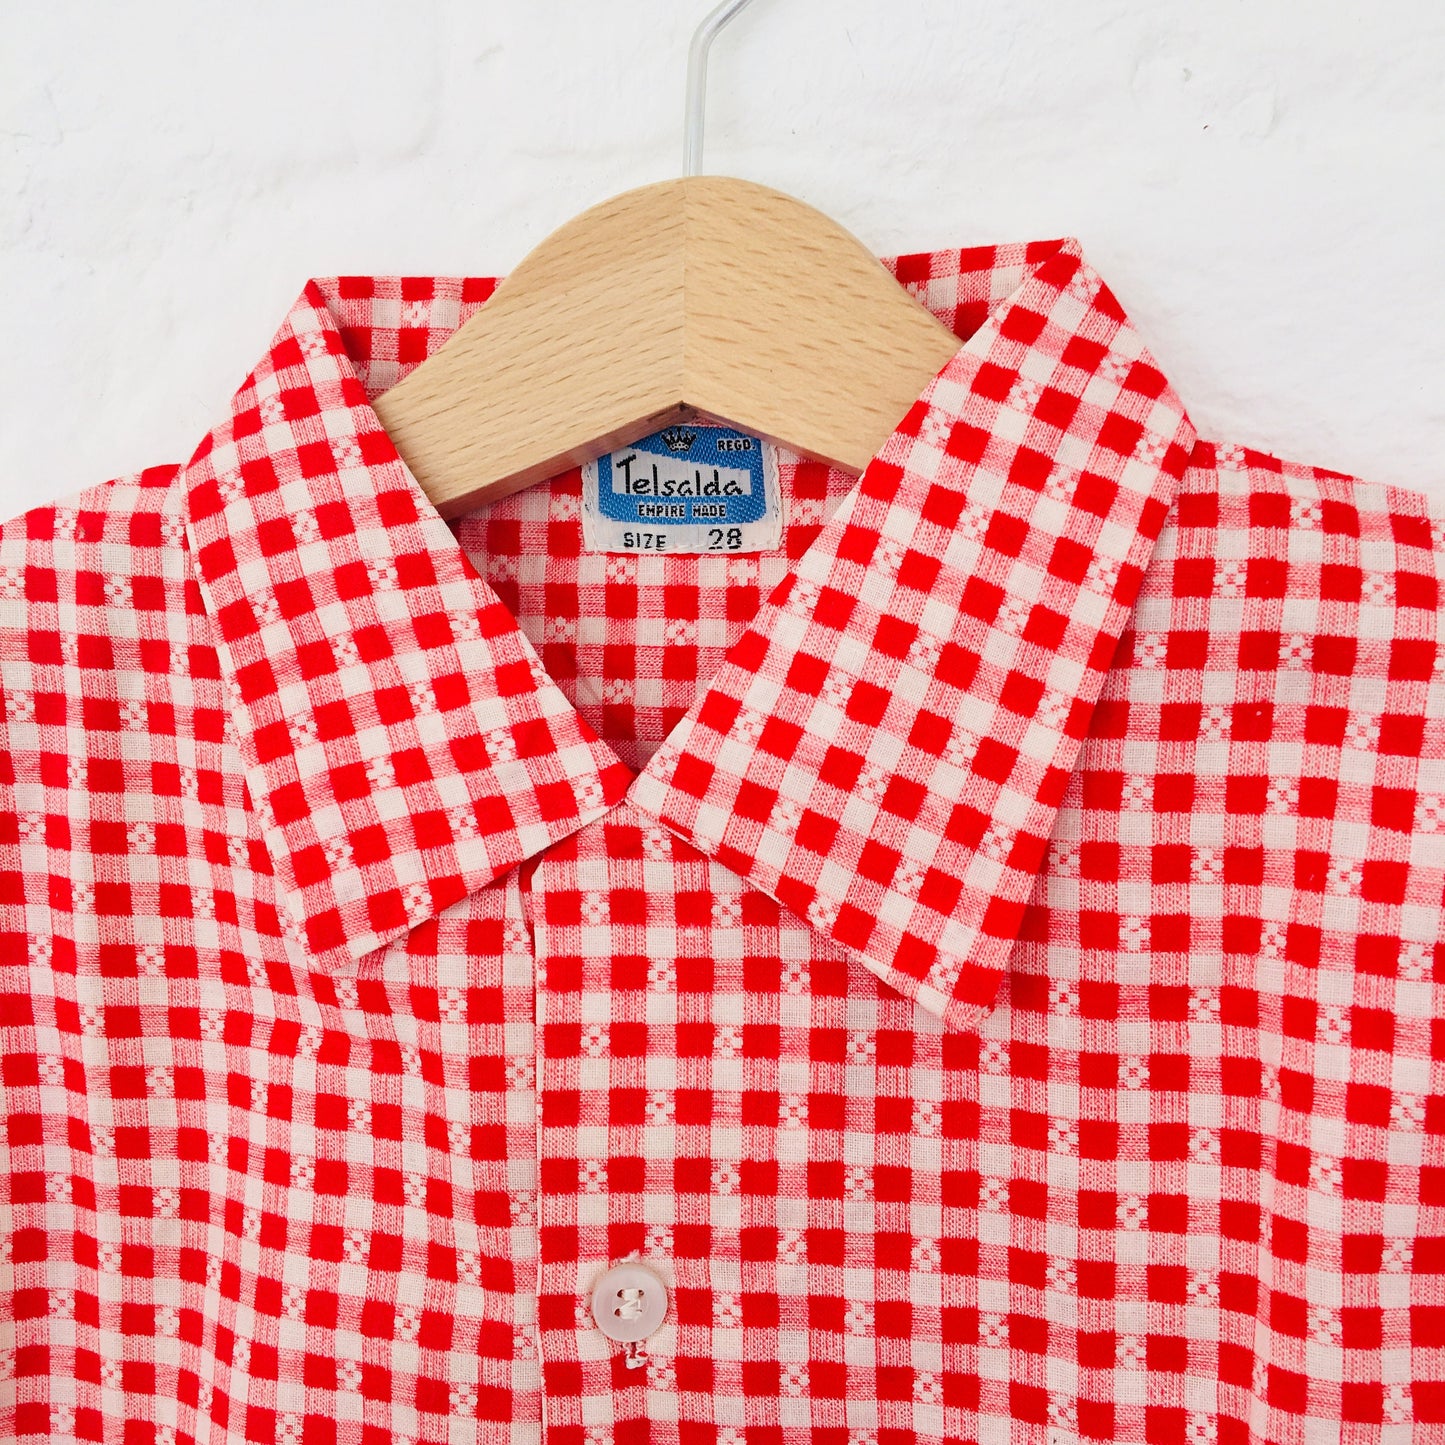 Vintage 60's Checked Red Shirt 8-10Y